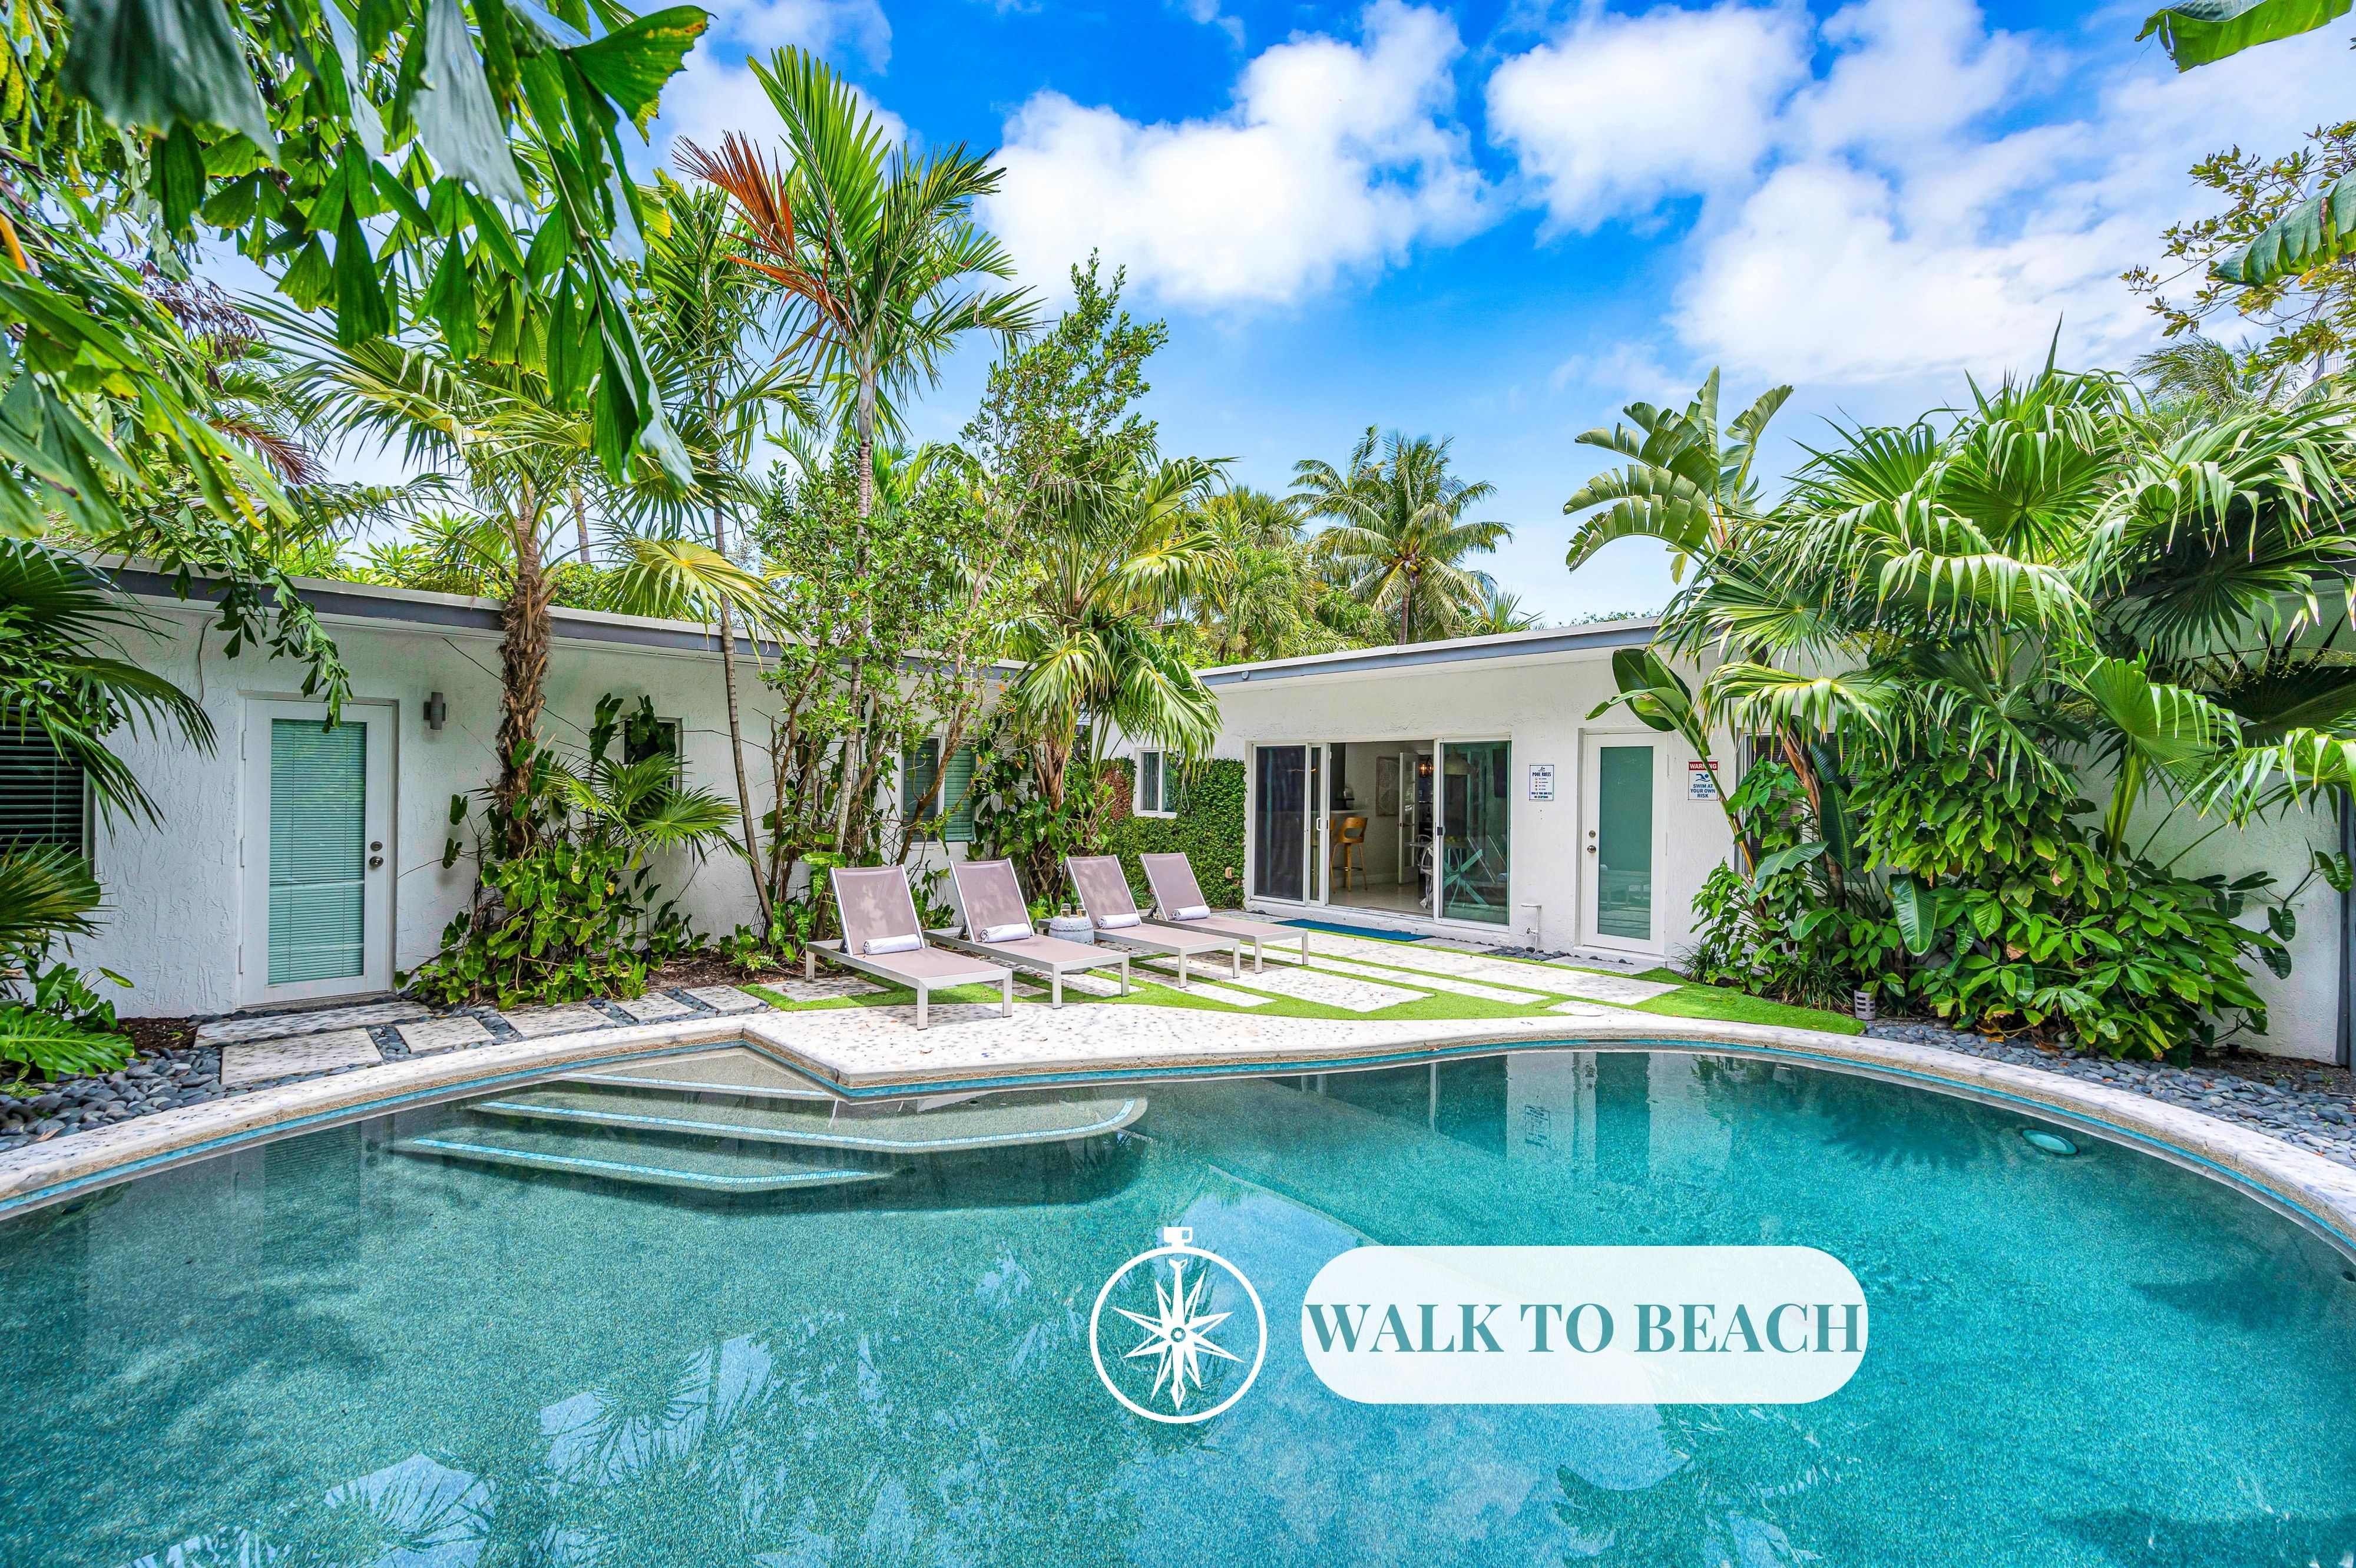 This modern residence is snuggled in a cul-de-sac of Birch Park Finger Estates, just off the picturesque A1A and steps away from the beach.